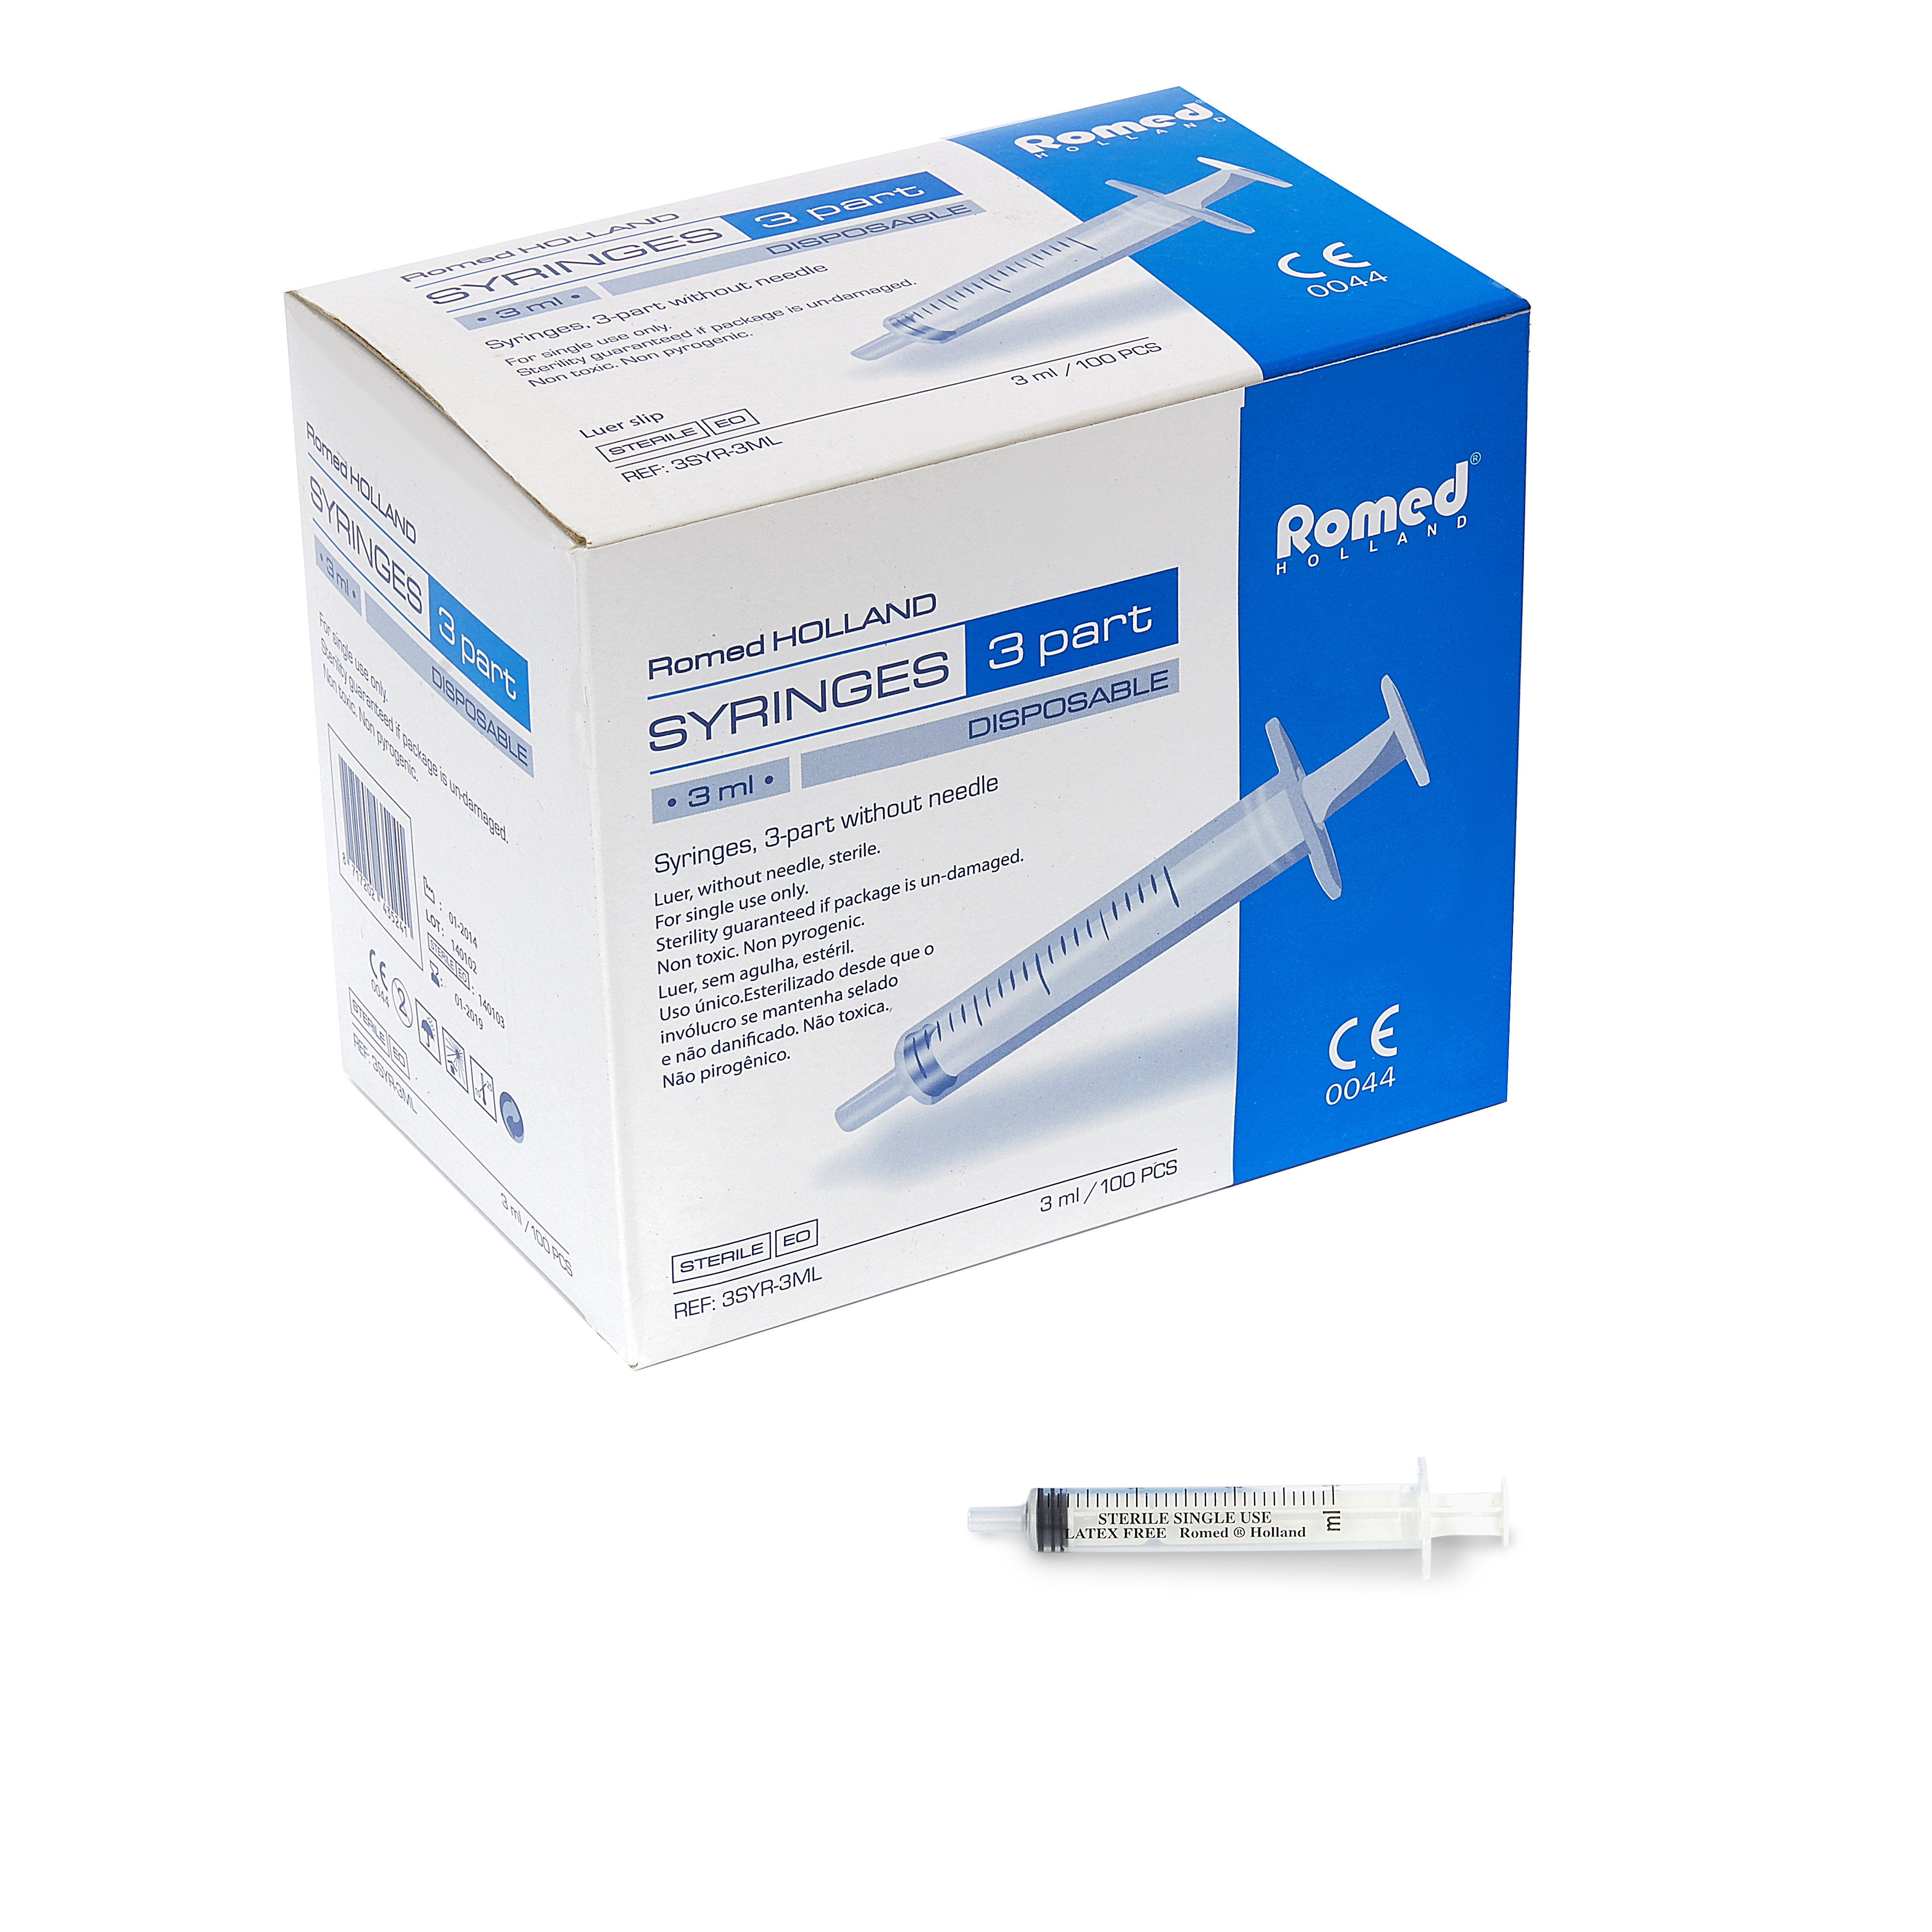 3SYR-3ML Romed 3-part syringes 3ml, without needle, sterile per piece, 100 pcs in an inner box, 30 x 100 pcs = 3.000 pcs in a carton.